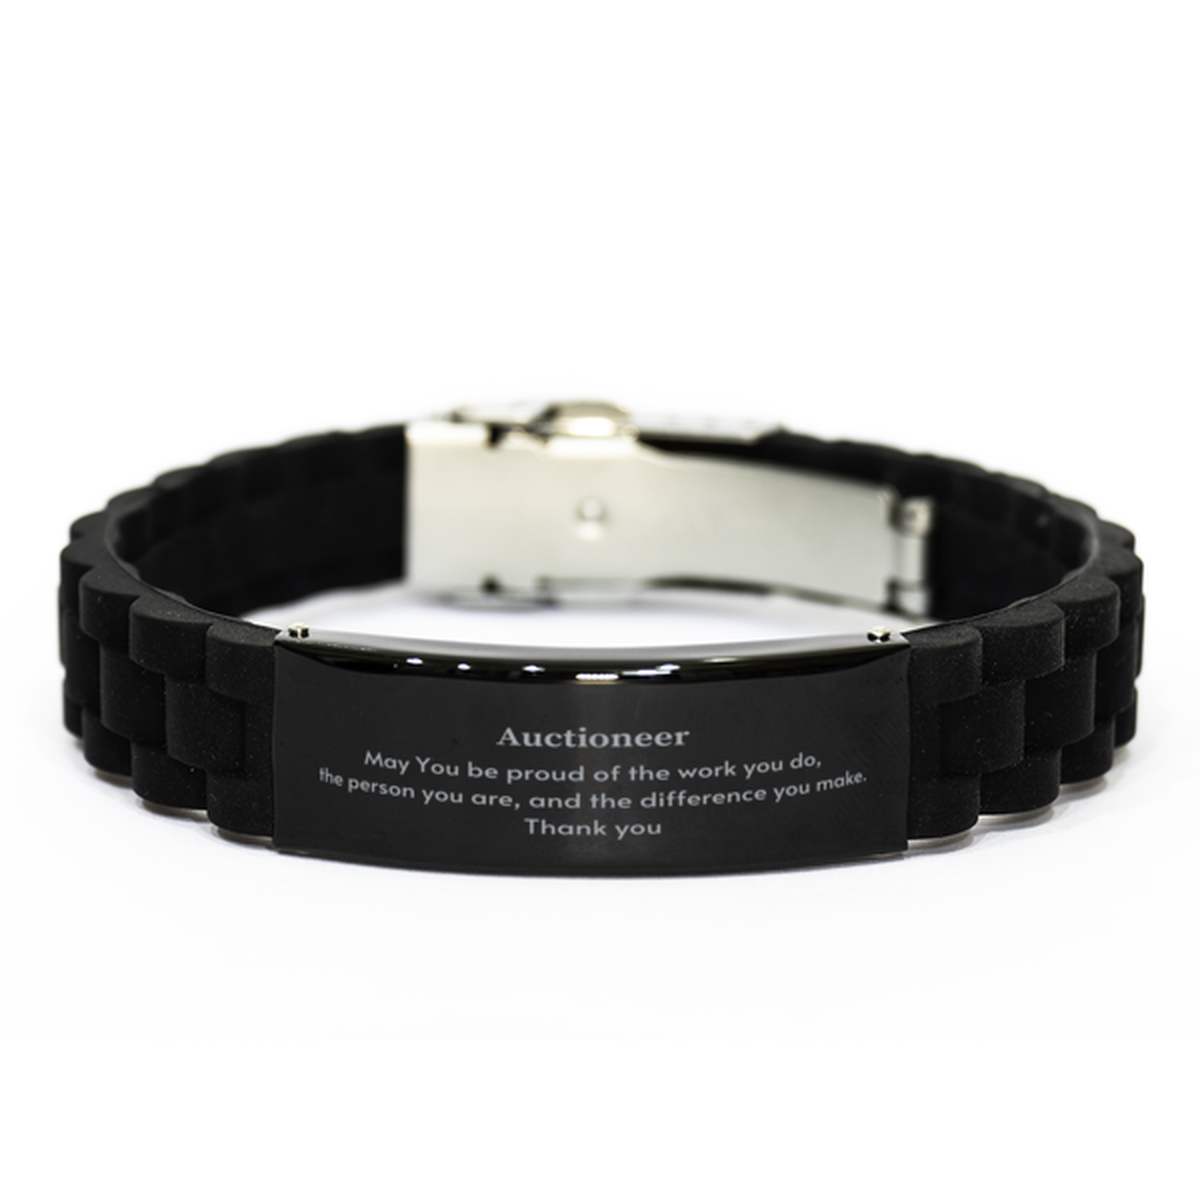 Heartwarming Black Glidelock Clasp Bracelet Retirement Coworkers Gifts for Auctioneer, Auctioneer May You be proud of the work you do, the person you are Gifts for Boss Men Women Friends